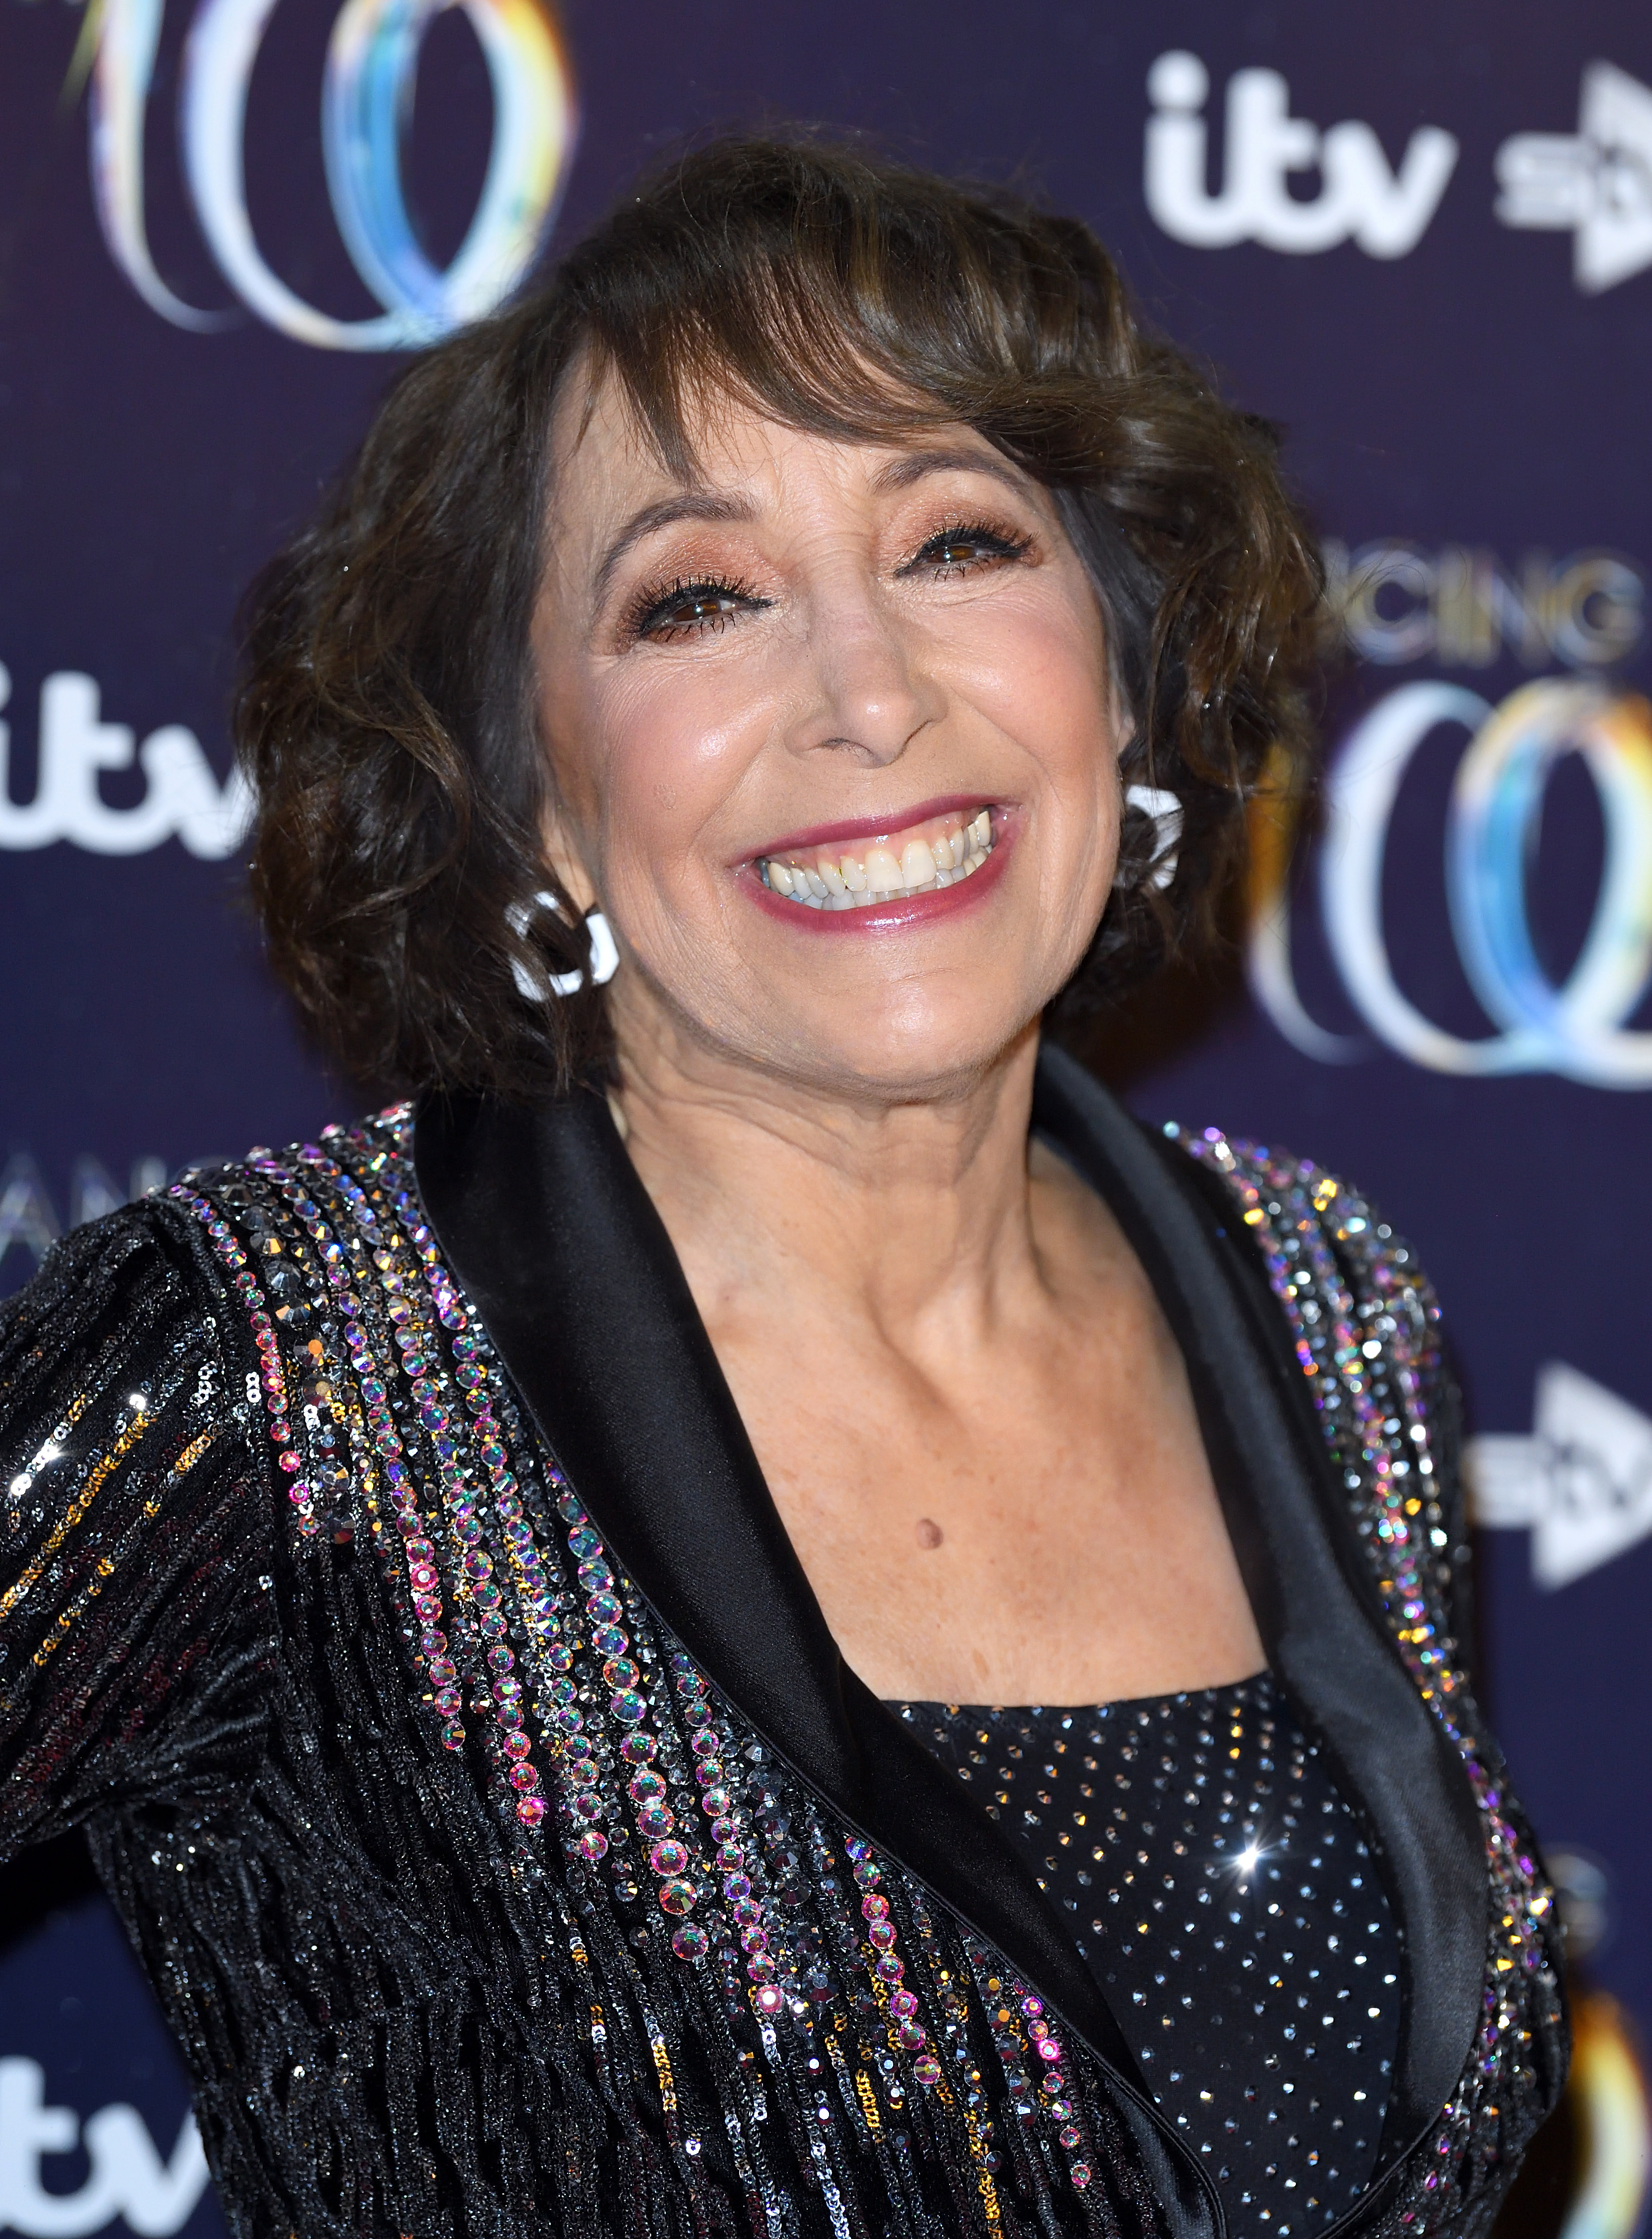 Didi Conn attends a photocall for "Dancing on Ice" at the Natural History Museum Ice Rink on December 18, 2018 in London, England. | Source: Getty Images